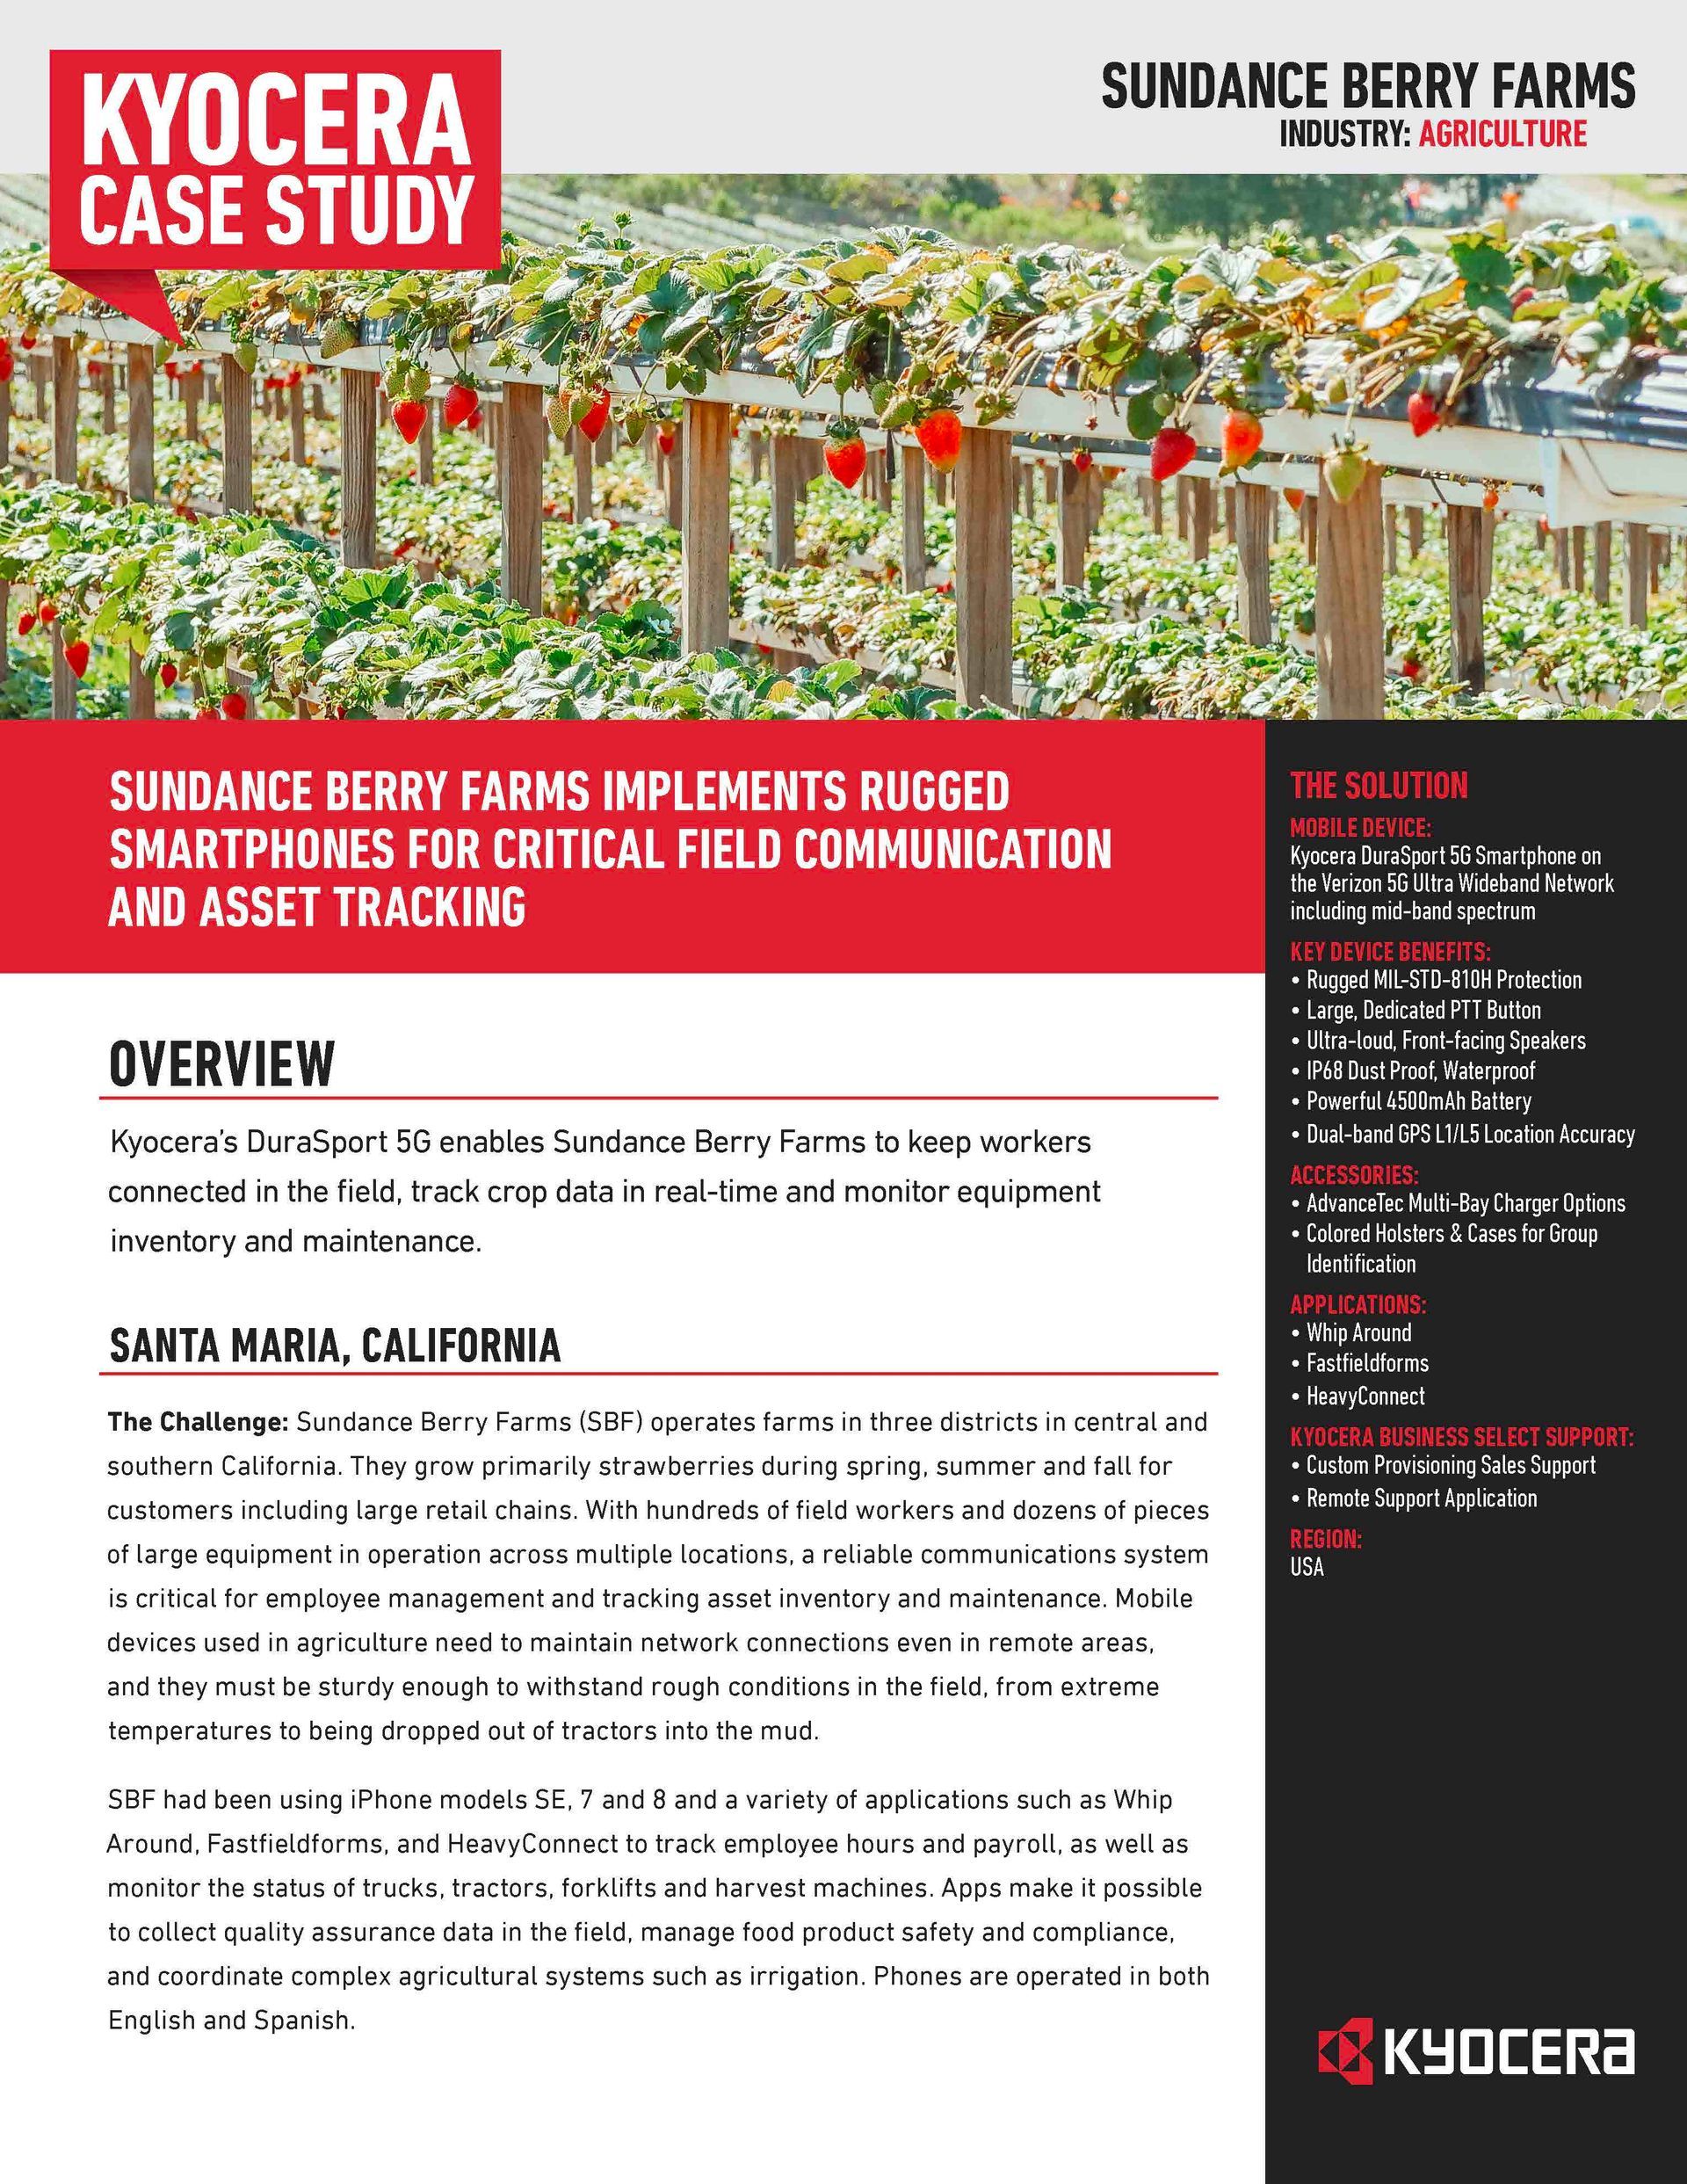 A case study for sundance berry farms implements rugged smarthomes for critical field communication and asset tracking